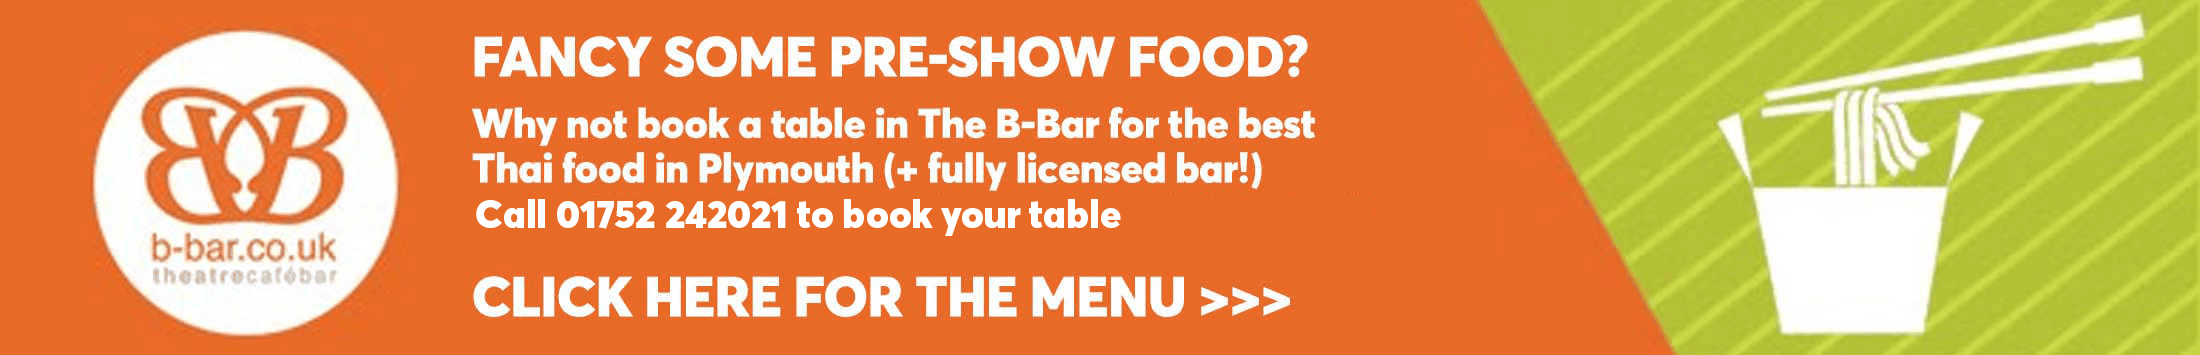 Bbar new table booking footer strip 2023